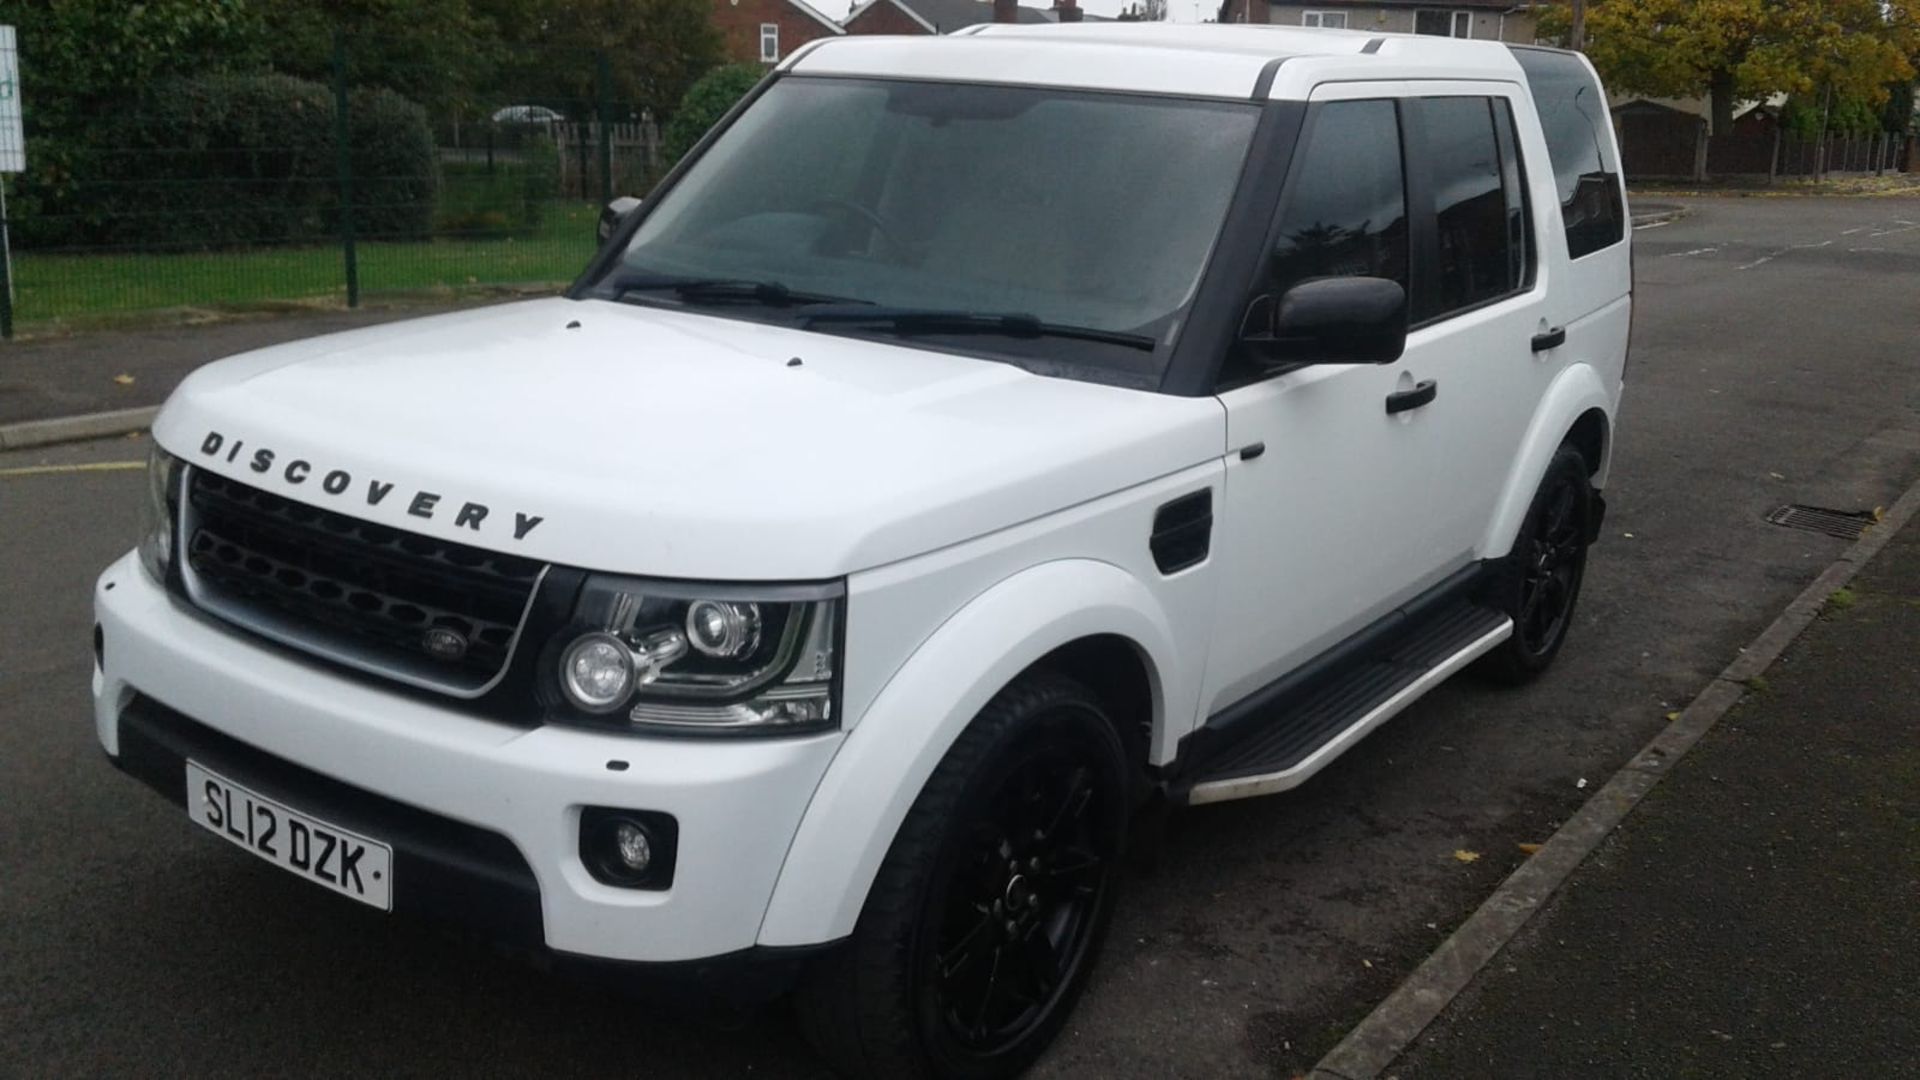 2012/12 REG LAND ROVER DISCOVERY GS SDV6 AUTOMATIC 3.0 DIESEL 4X4, GOOD SERVICE HISTORY *NO VAT* - Image 2 of 12